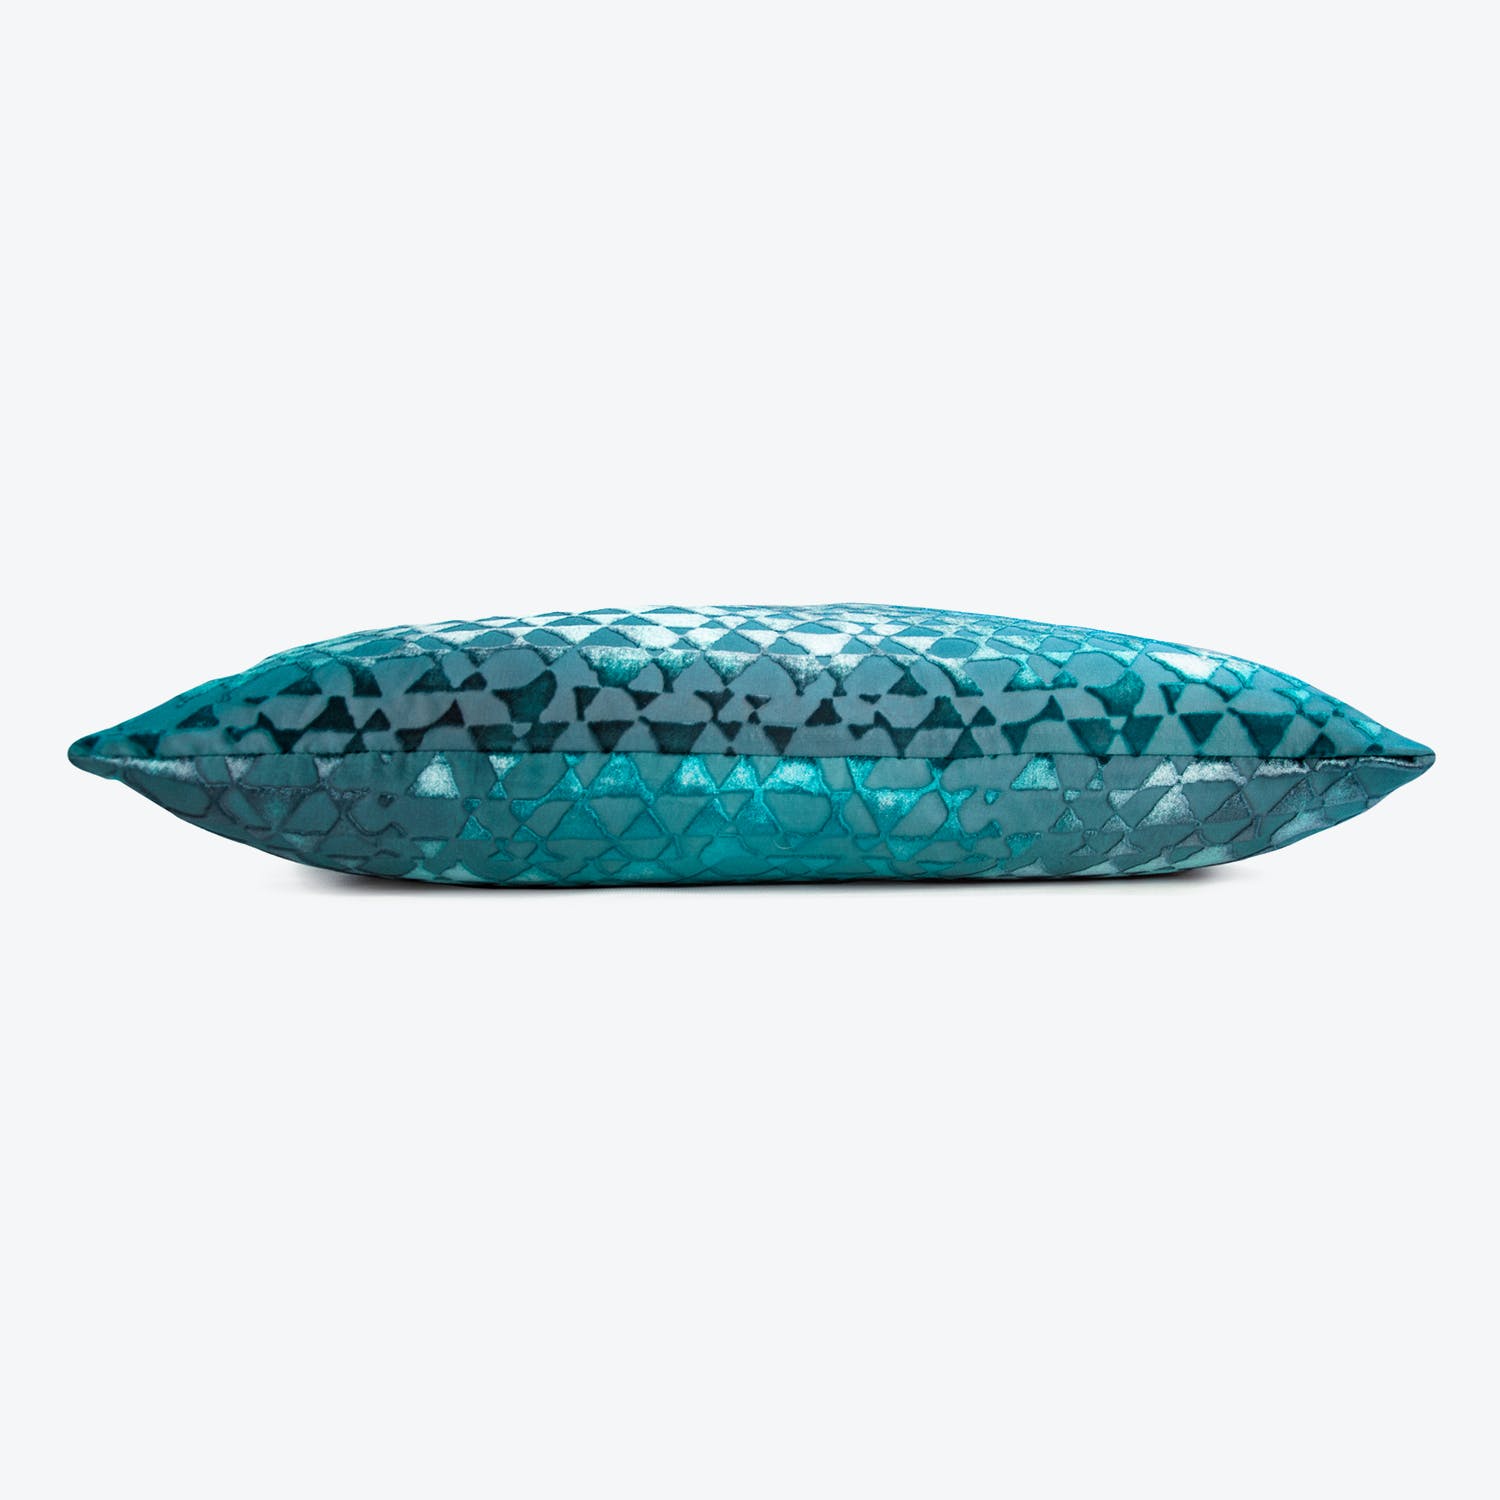 Vibrant teal and blue geometric patterned pillow adds decorative flair.